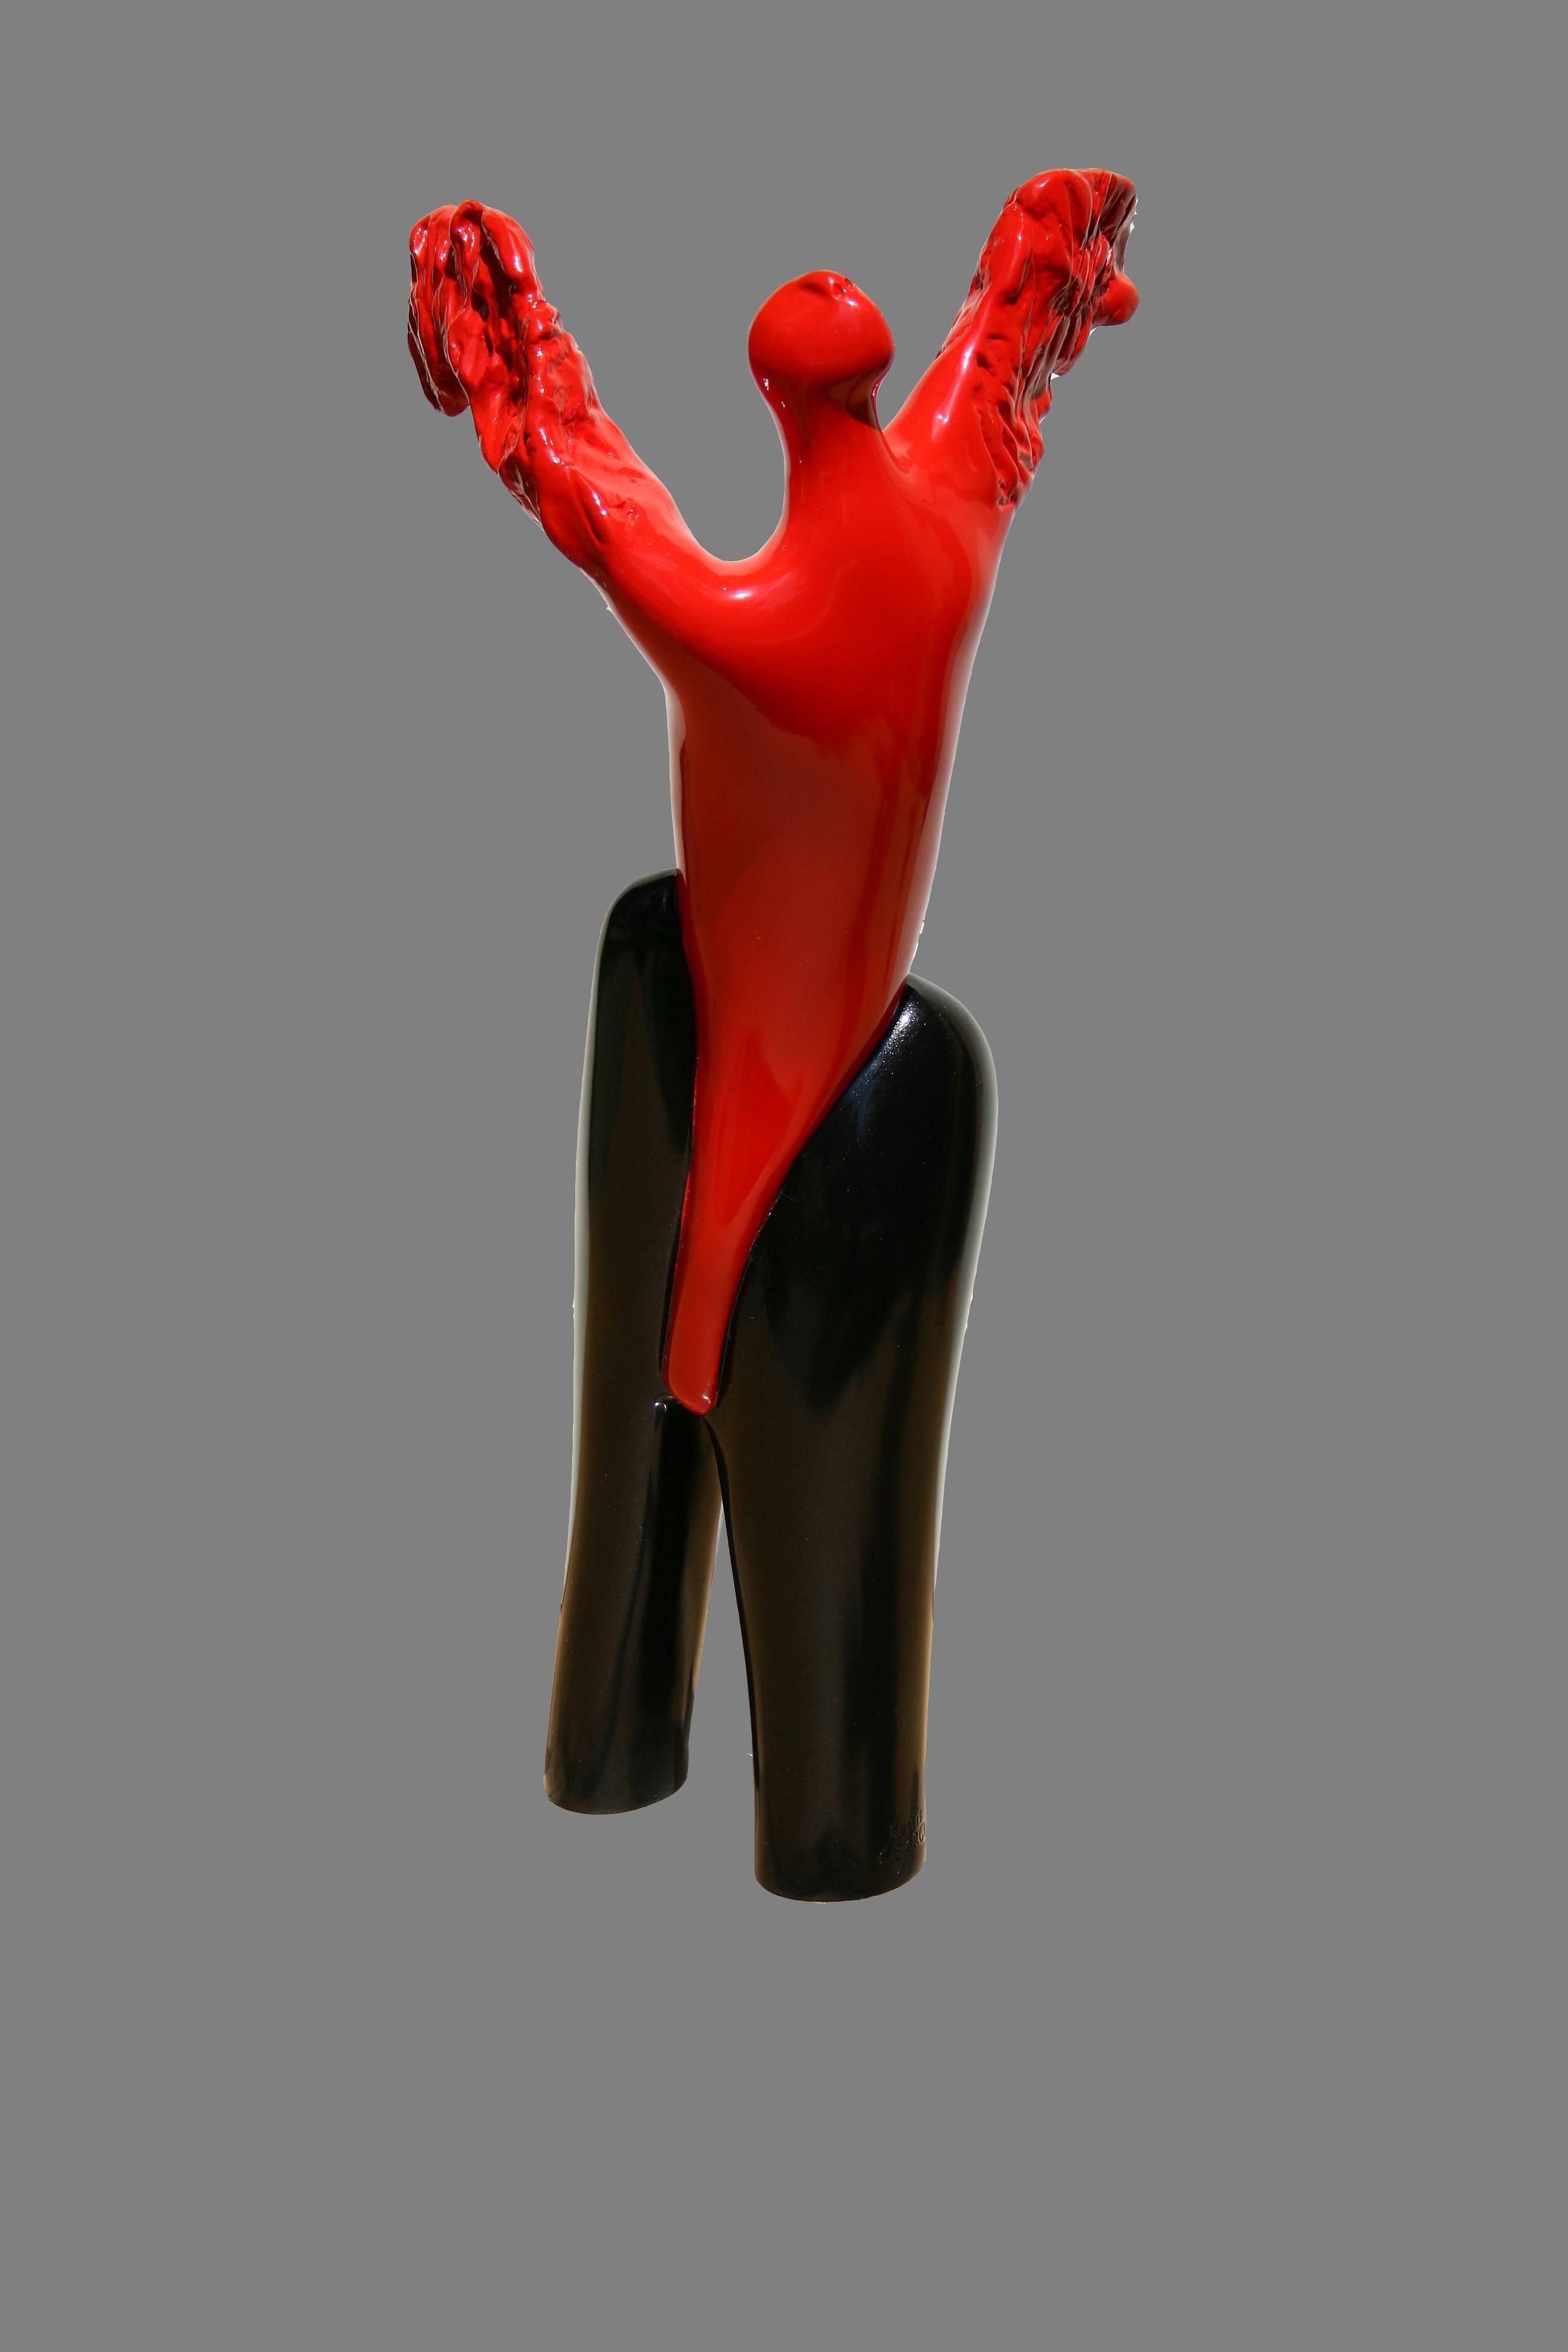 Kostis Georgiou Abstract Sculpture - Phylax by Kostis  Georgiou - Figurative Sculpture